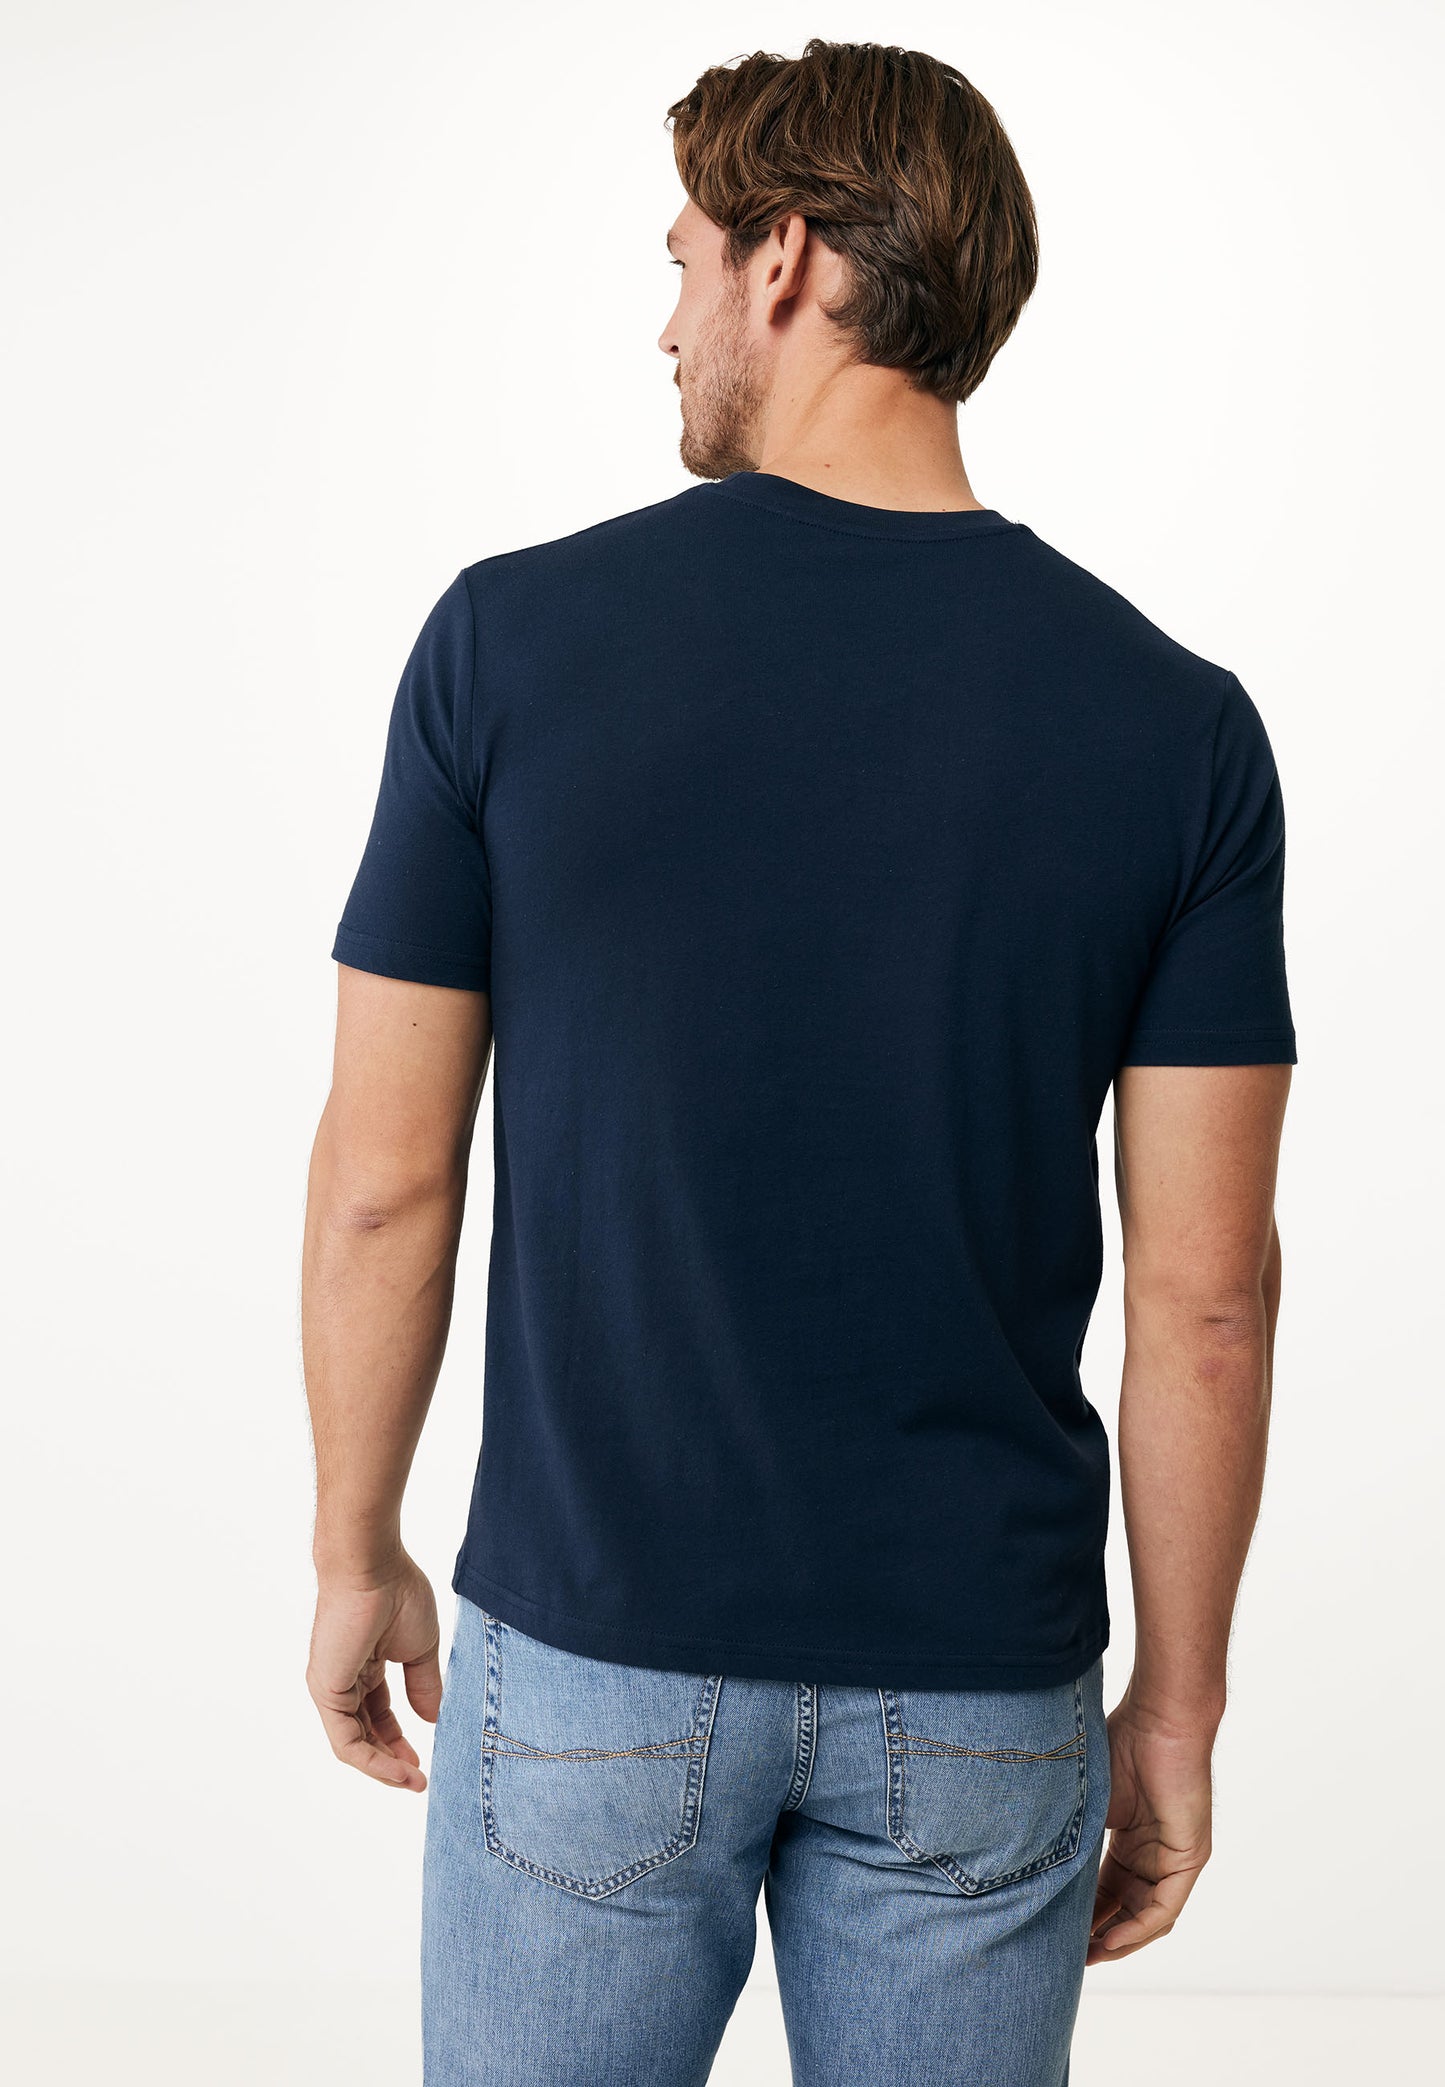 T-shirt with Small Print on the Chest